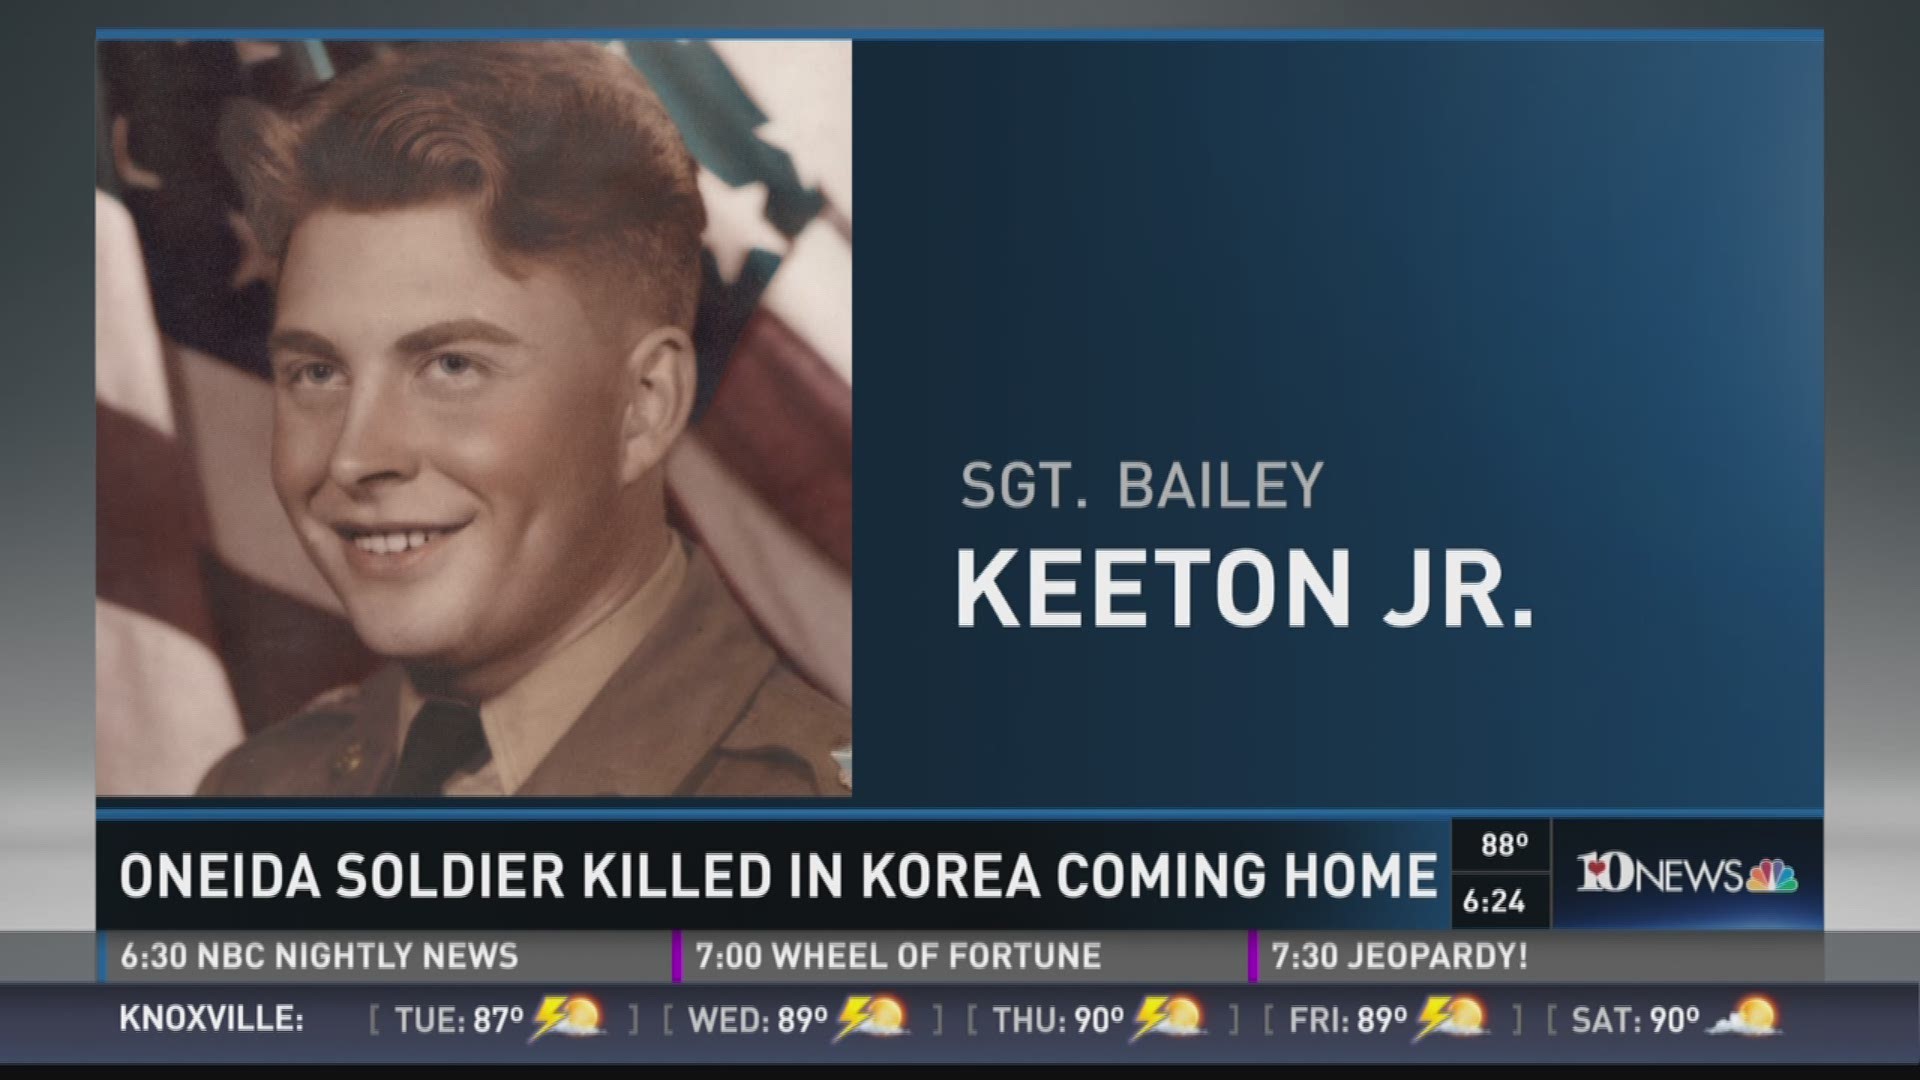 A Scott County family is finding closure more than 60 years after losing a loved one in the Korean War. June 20, 2016